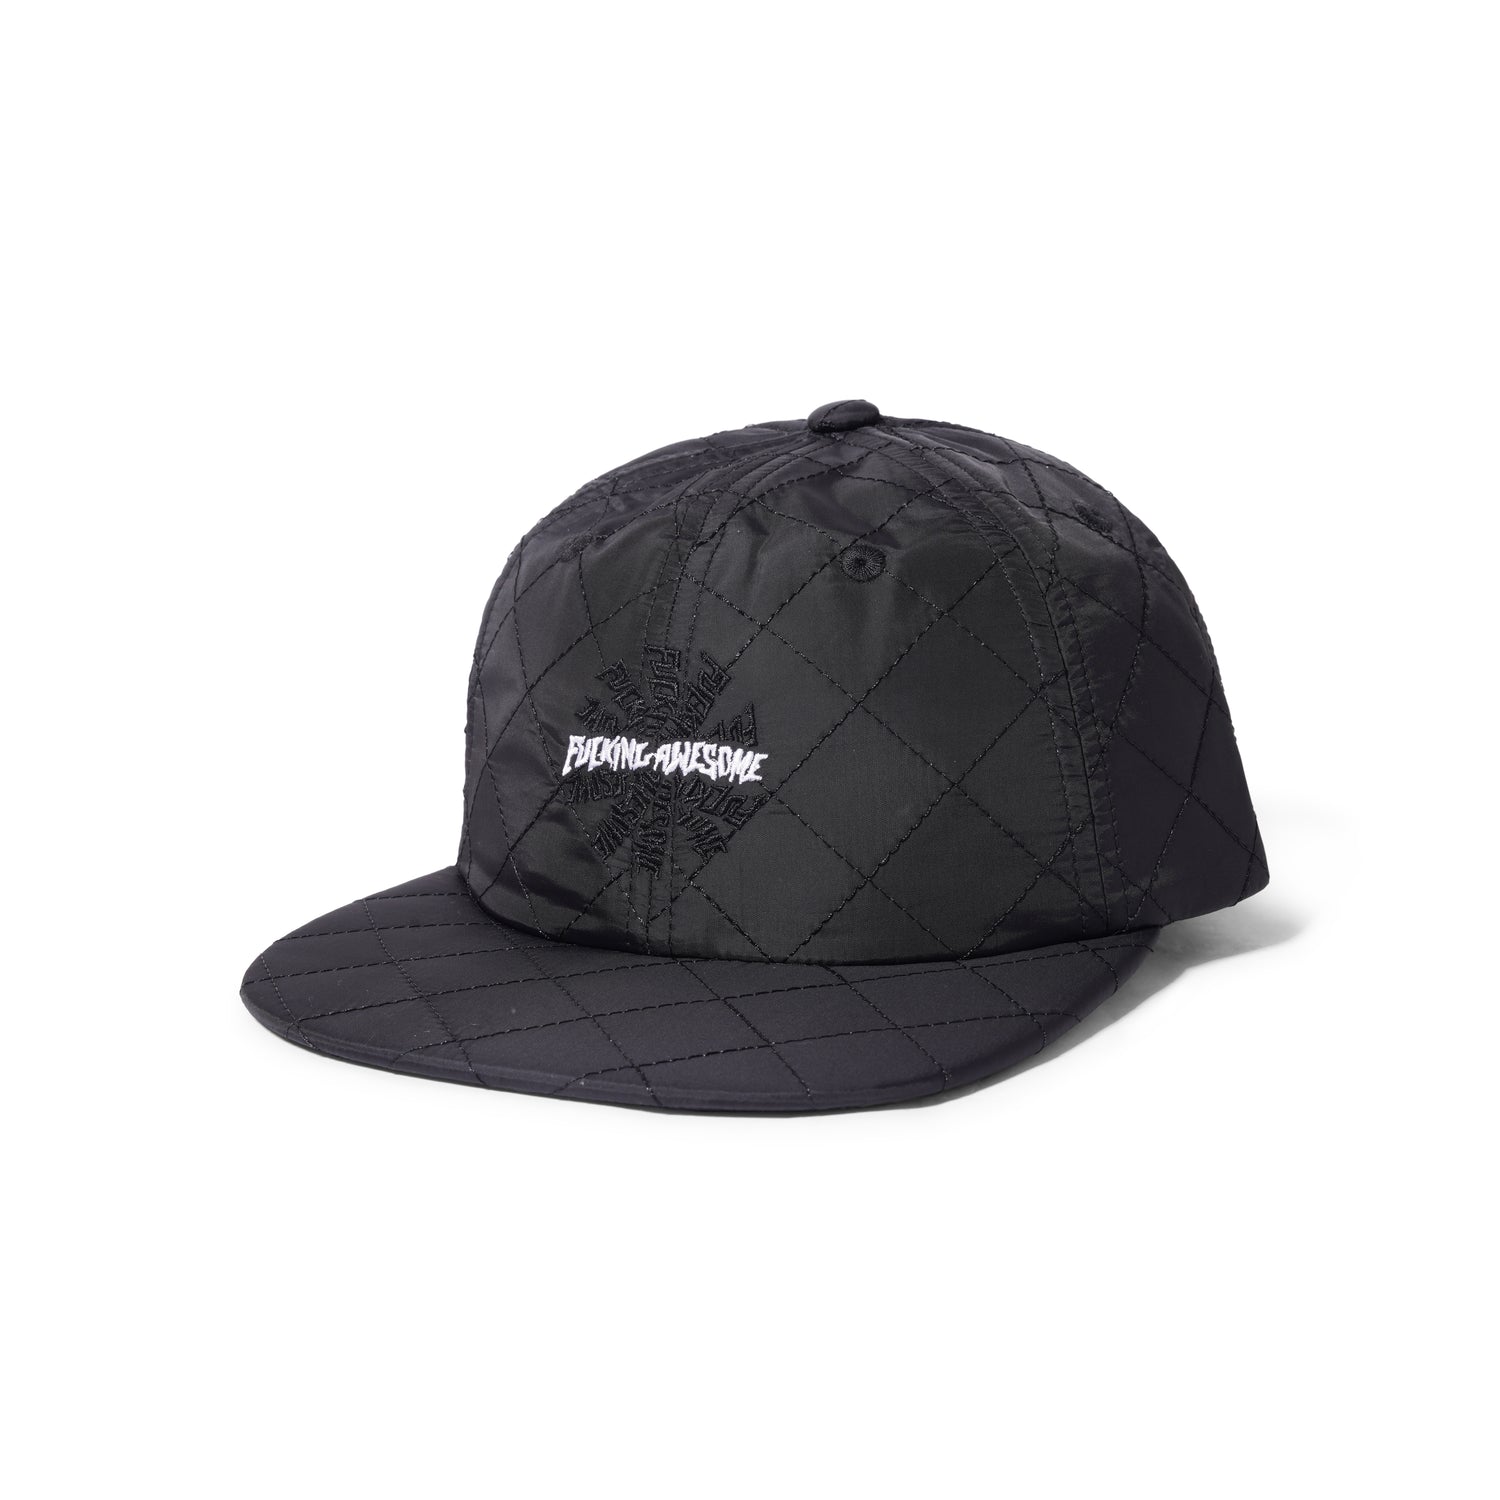 Quilted Spiral 6 Panel Hat, Black